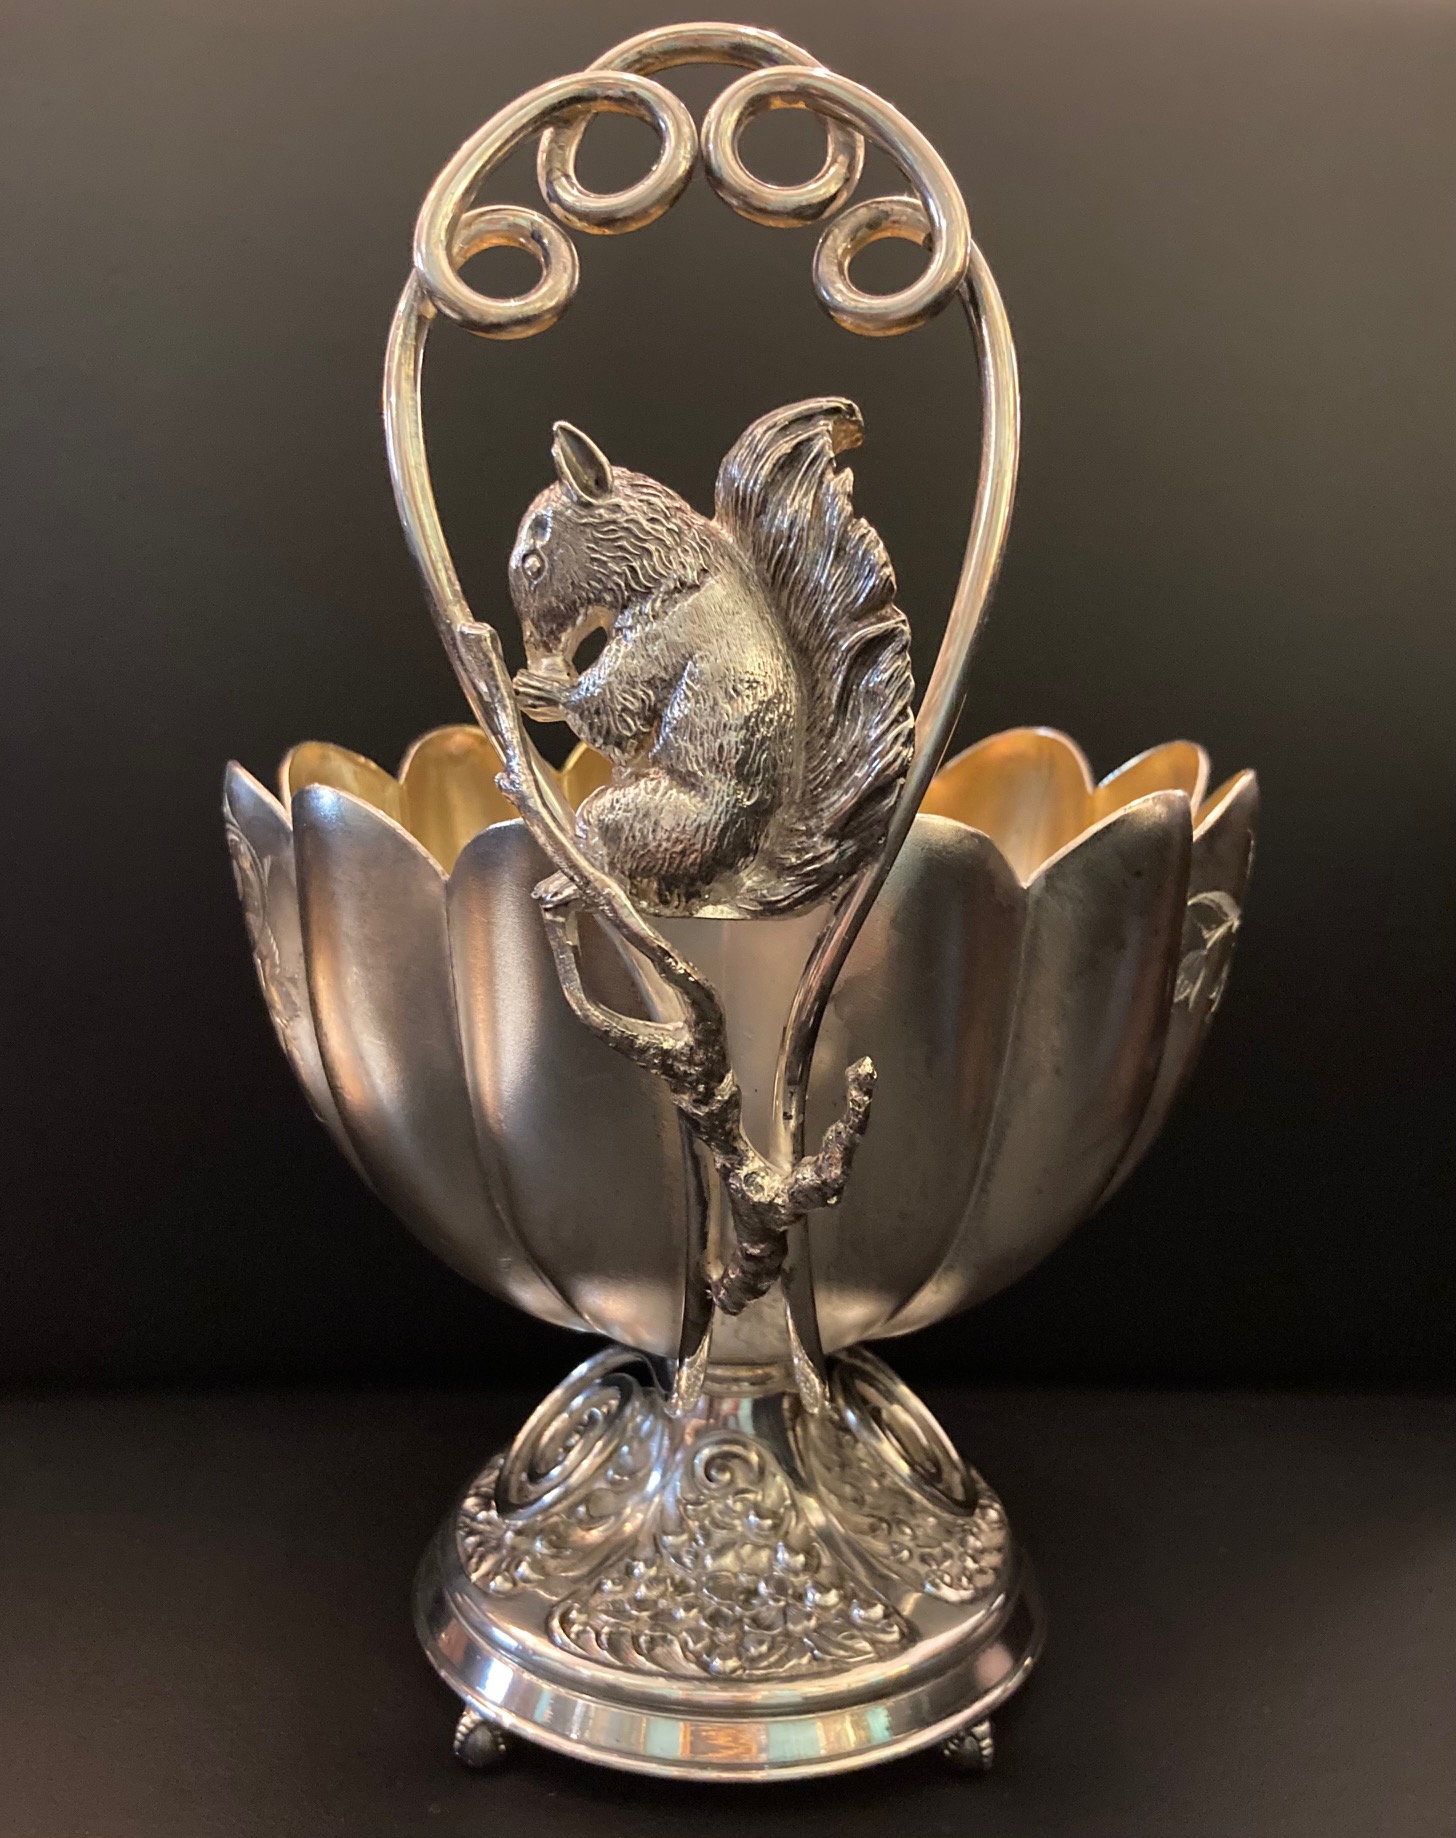 Wilcox Silver Plate Squirrel Nut Bowl